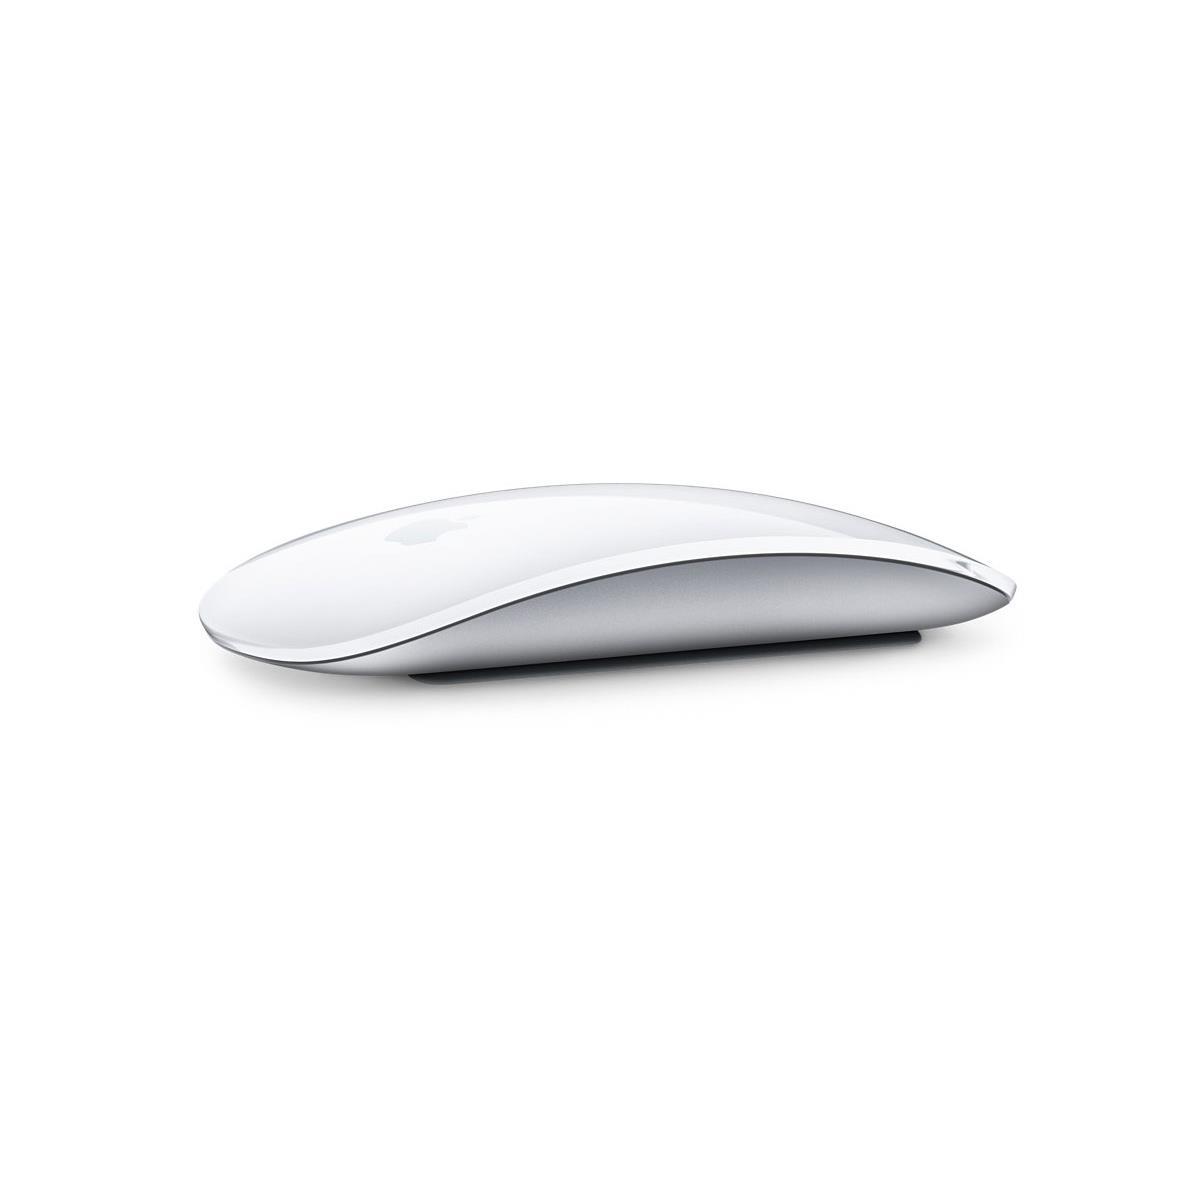 Image of Apple Magic Mouse 2